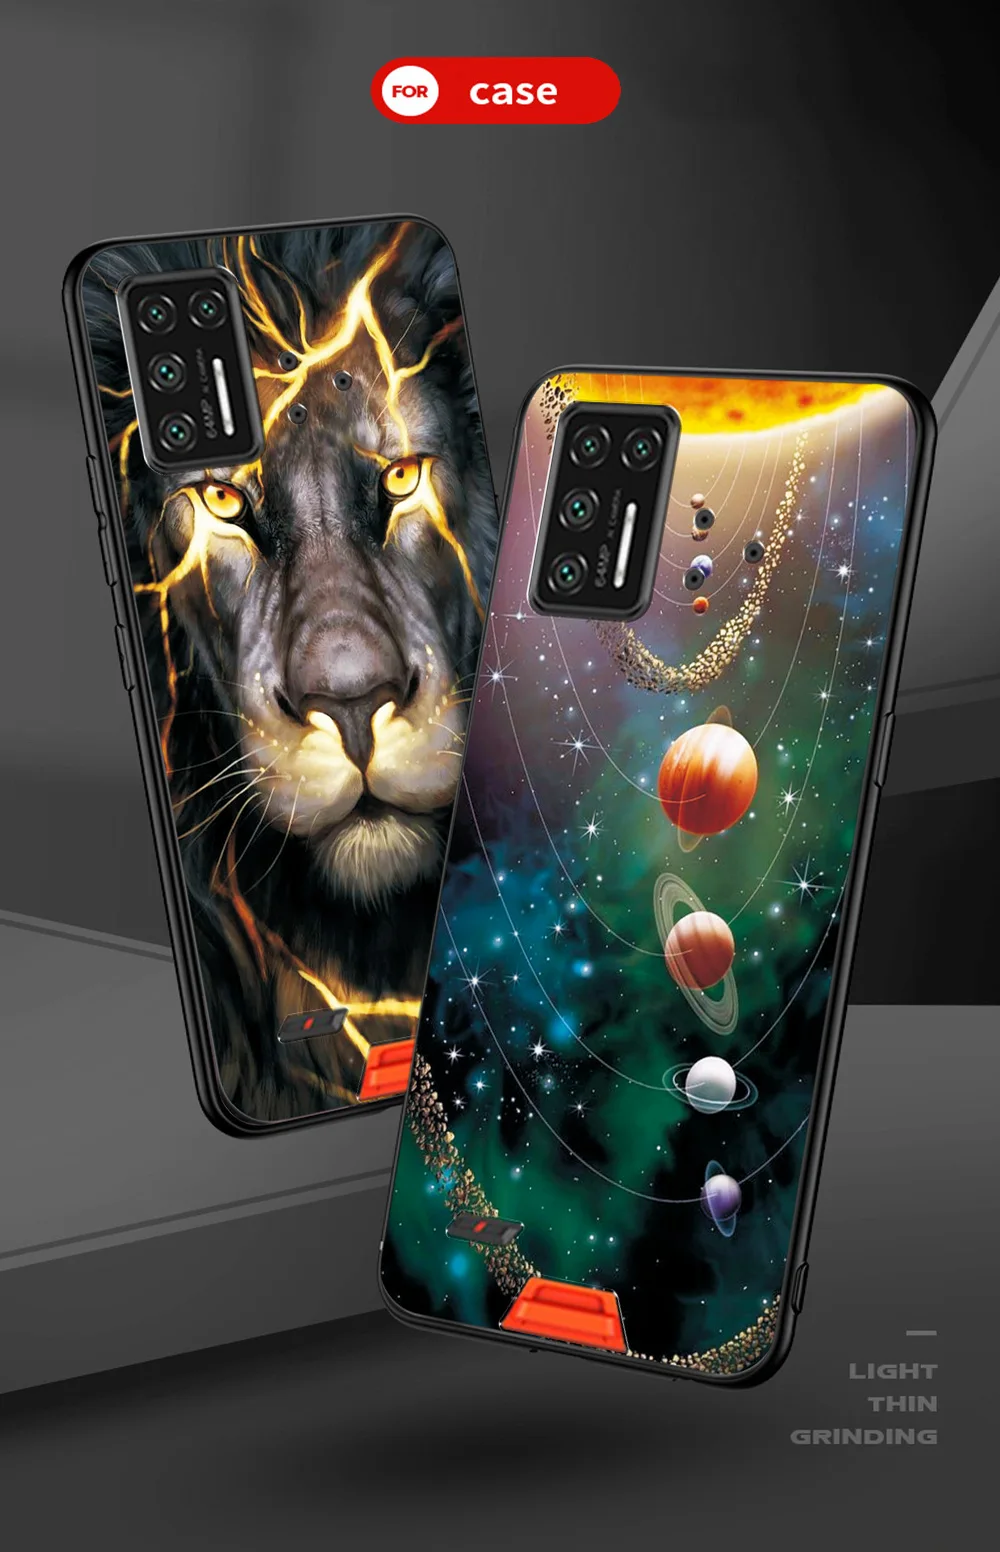 S3d46c212ebfc45449e9da9fb7112b3658 For UMIDIGI Bison GT Case GT2Pro Cartoon Back Cover Silicone Case For UMIDIGI Bison GT2 Pro 5G TPU Bumper For UMIDIGIBison GT2